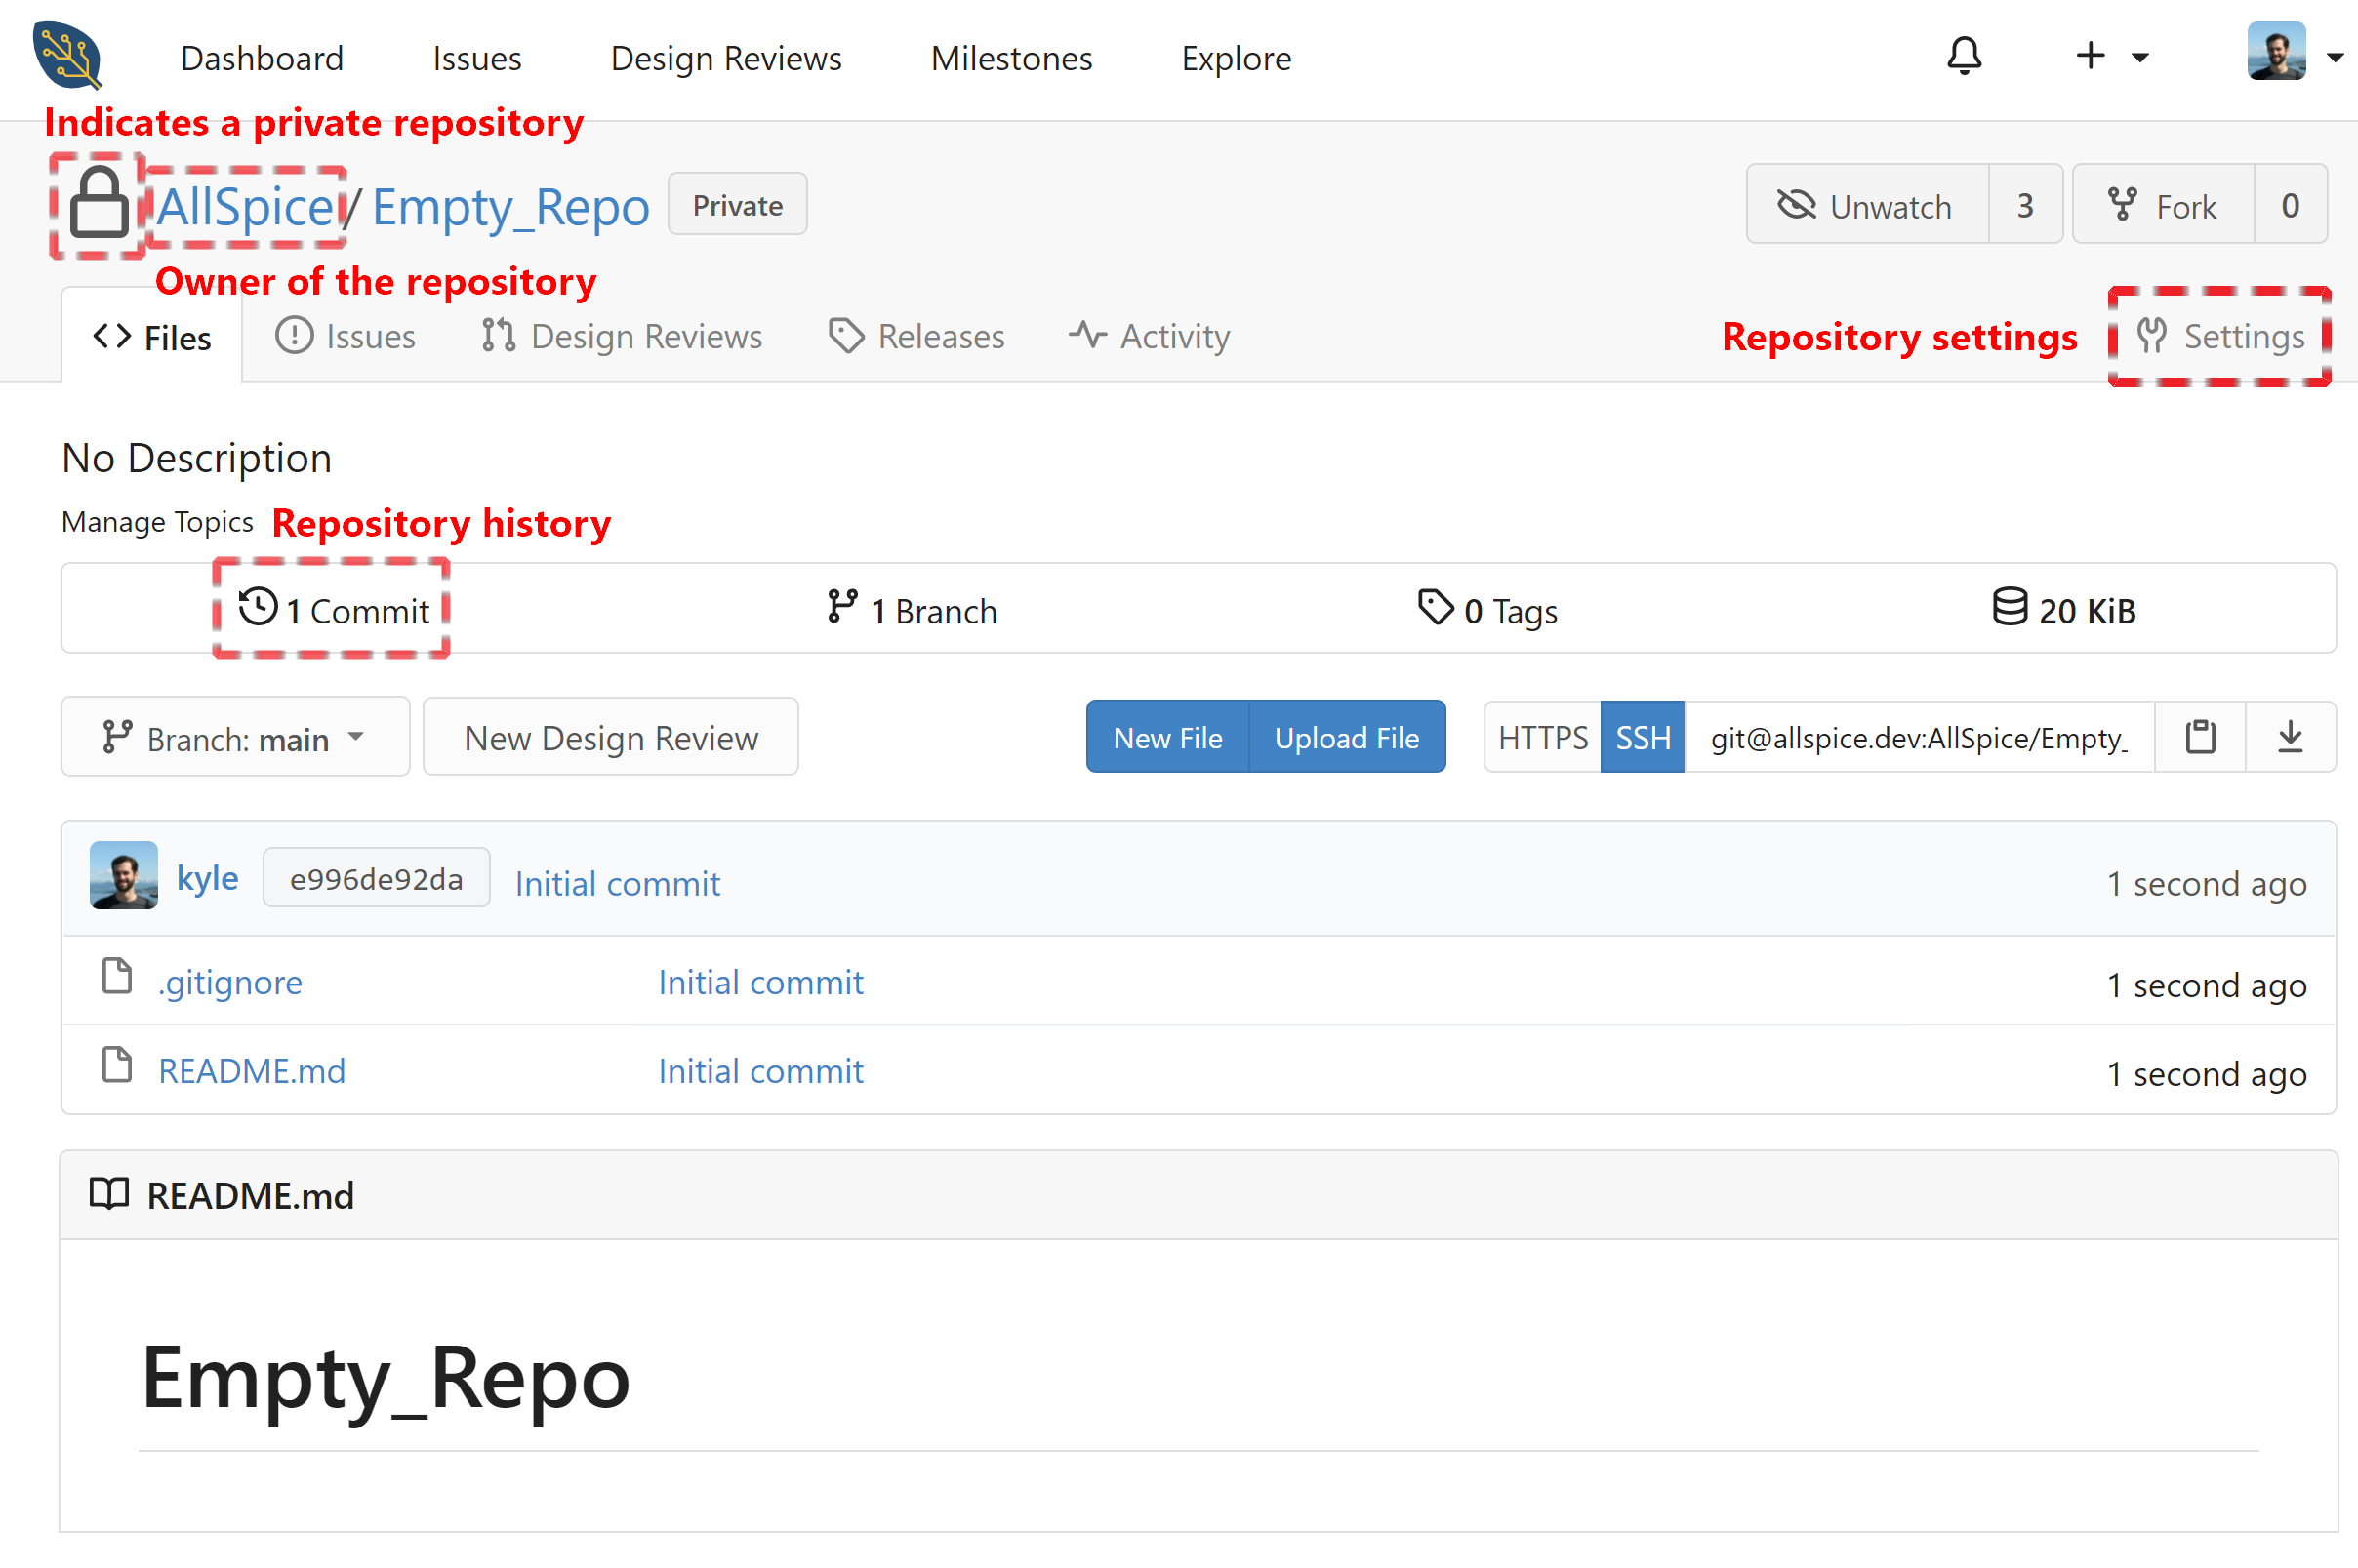 Repository overview. Upper left has a lock beside AllSpice, indicating a private repository. Directly underneath there is "1 Commit" which tells the repository history. To the right there is settings, which are the repository's settings.